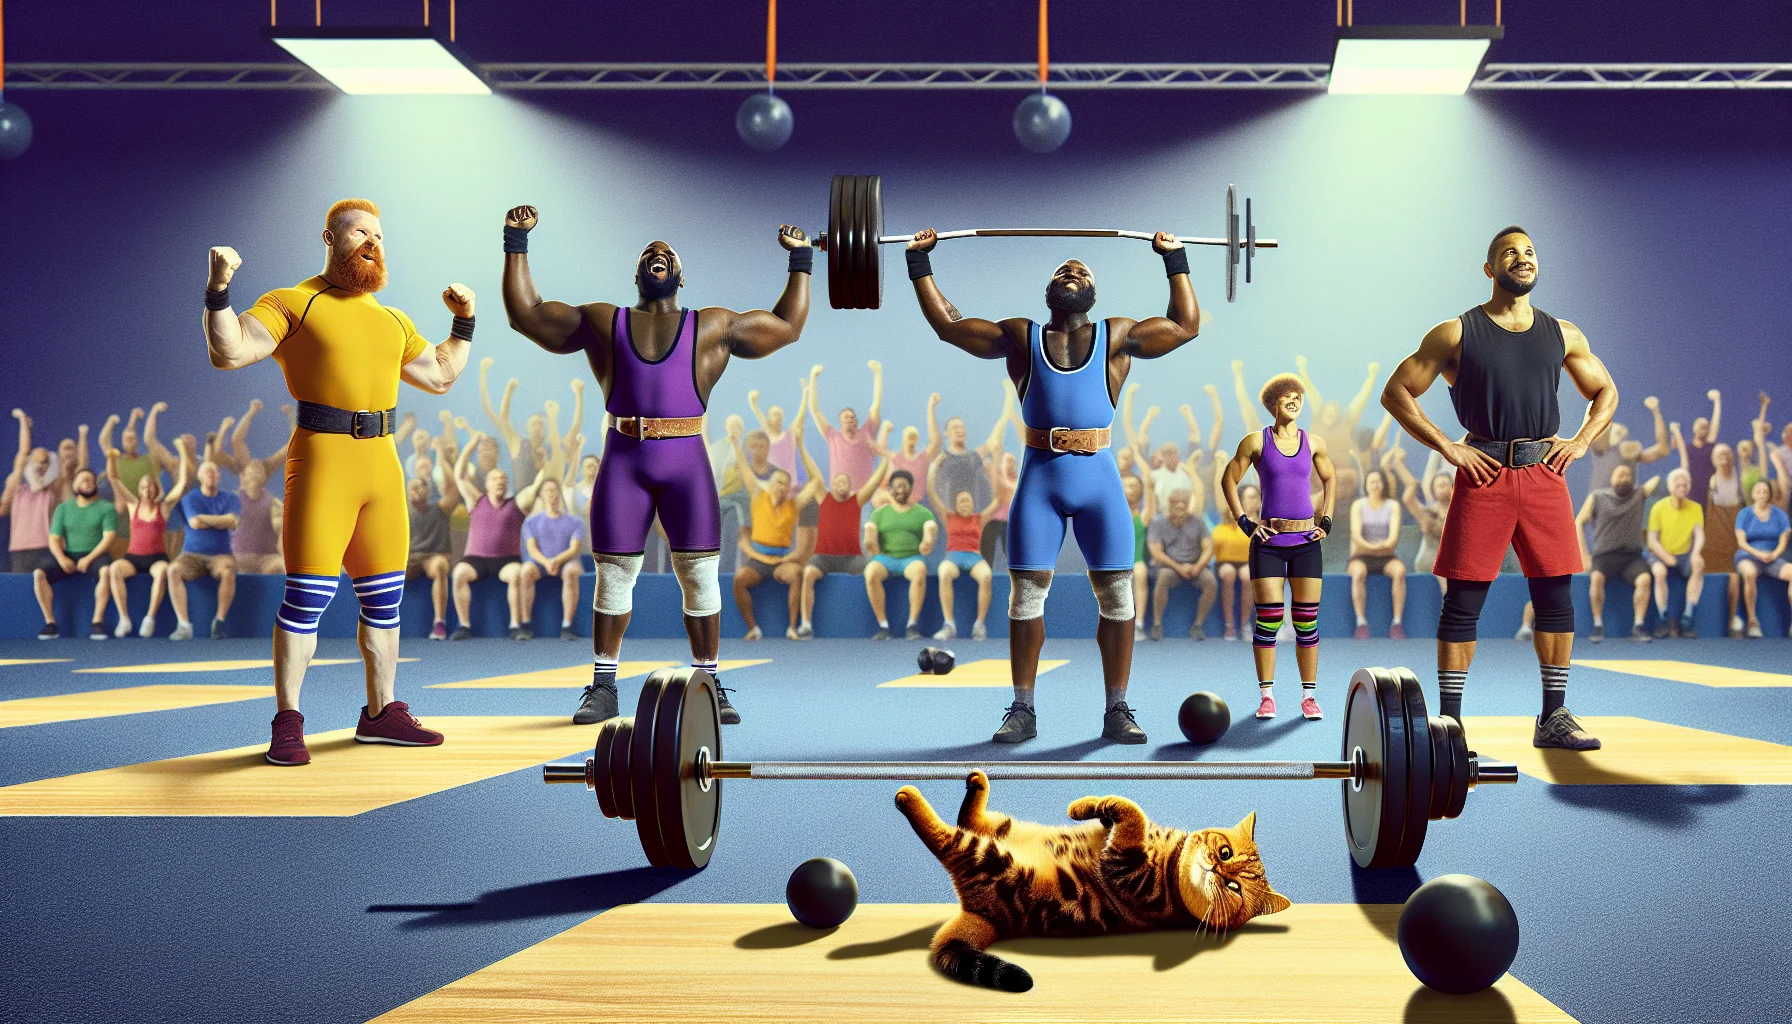 Create an engaging, humorous scene representing a powerlifting competition. Imagine the scene taking place in a lively gym. The competitors should be a solid mix of races and genders - Caucasian man, Black woman, South Asian man, and Hispanic woman participating in the event. Let's add a humorous twist; depict a round, lazy cat trying to join in, lifting a tiny dumbbell with its paw. The atmosphere should be light-hearted, with supportive crowd cheering on the lifters and amused with the cat's actions. This image aims to make powerlifting and exercise in general more appealing to the viewers.